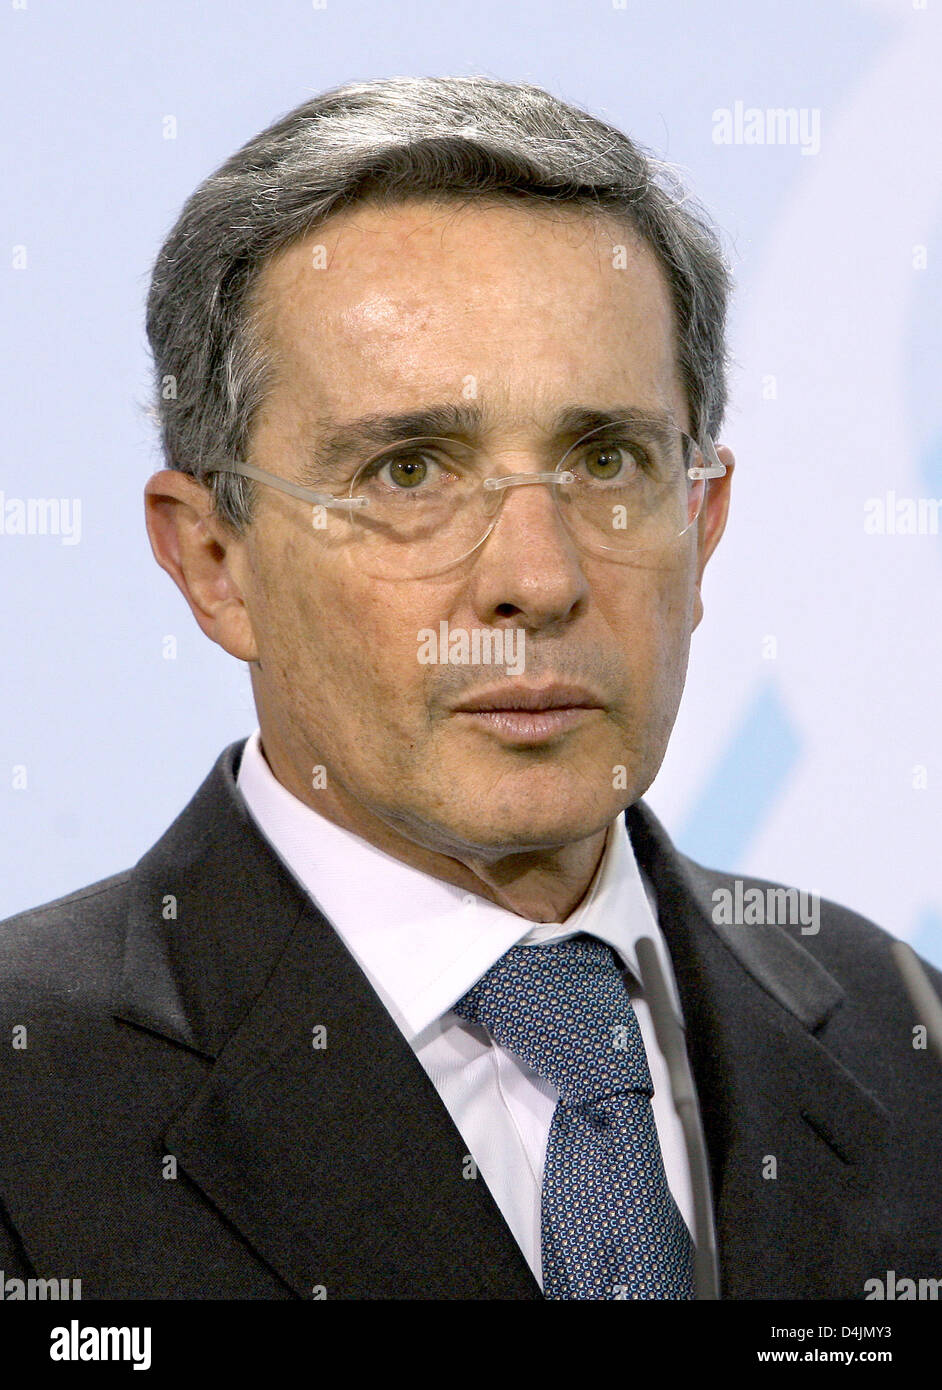 The picture shows Alvaro Uribe Velez, President of Colombia, in the Chancellery in Berlin, Germany, 31 January 2009. Photo: Stephanie Pilick Stock Photo